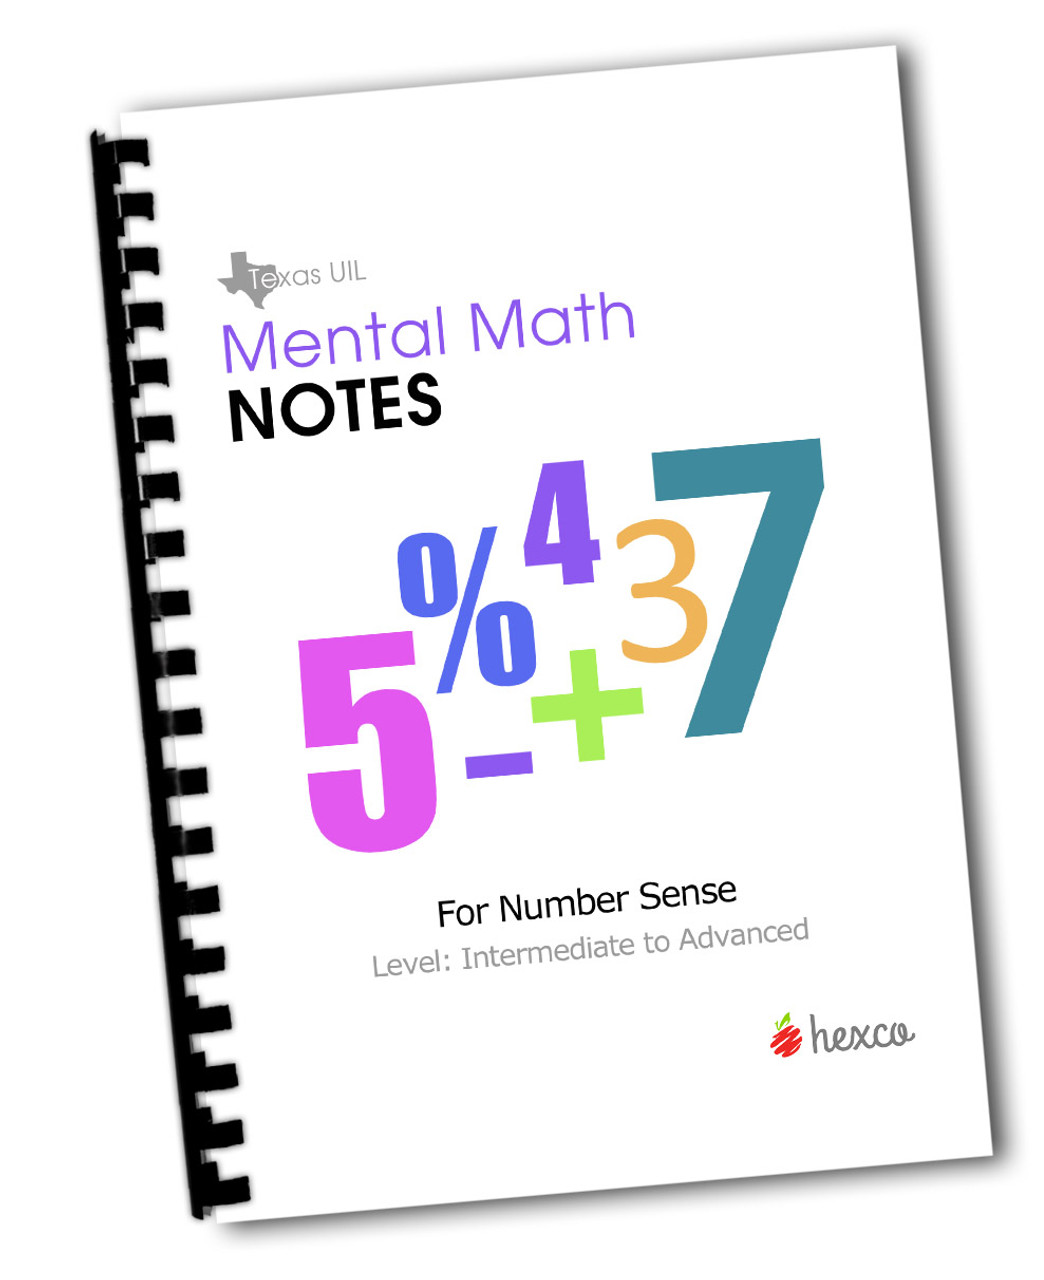 uil-number-sense-mental-math-contest-study-notes-hexco